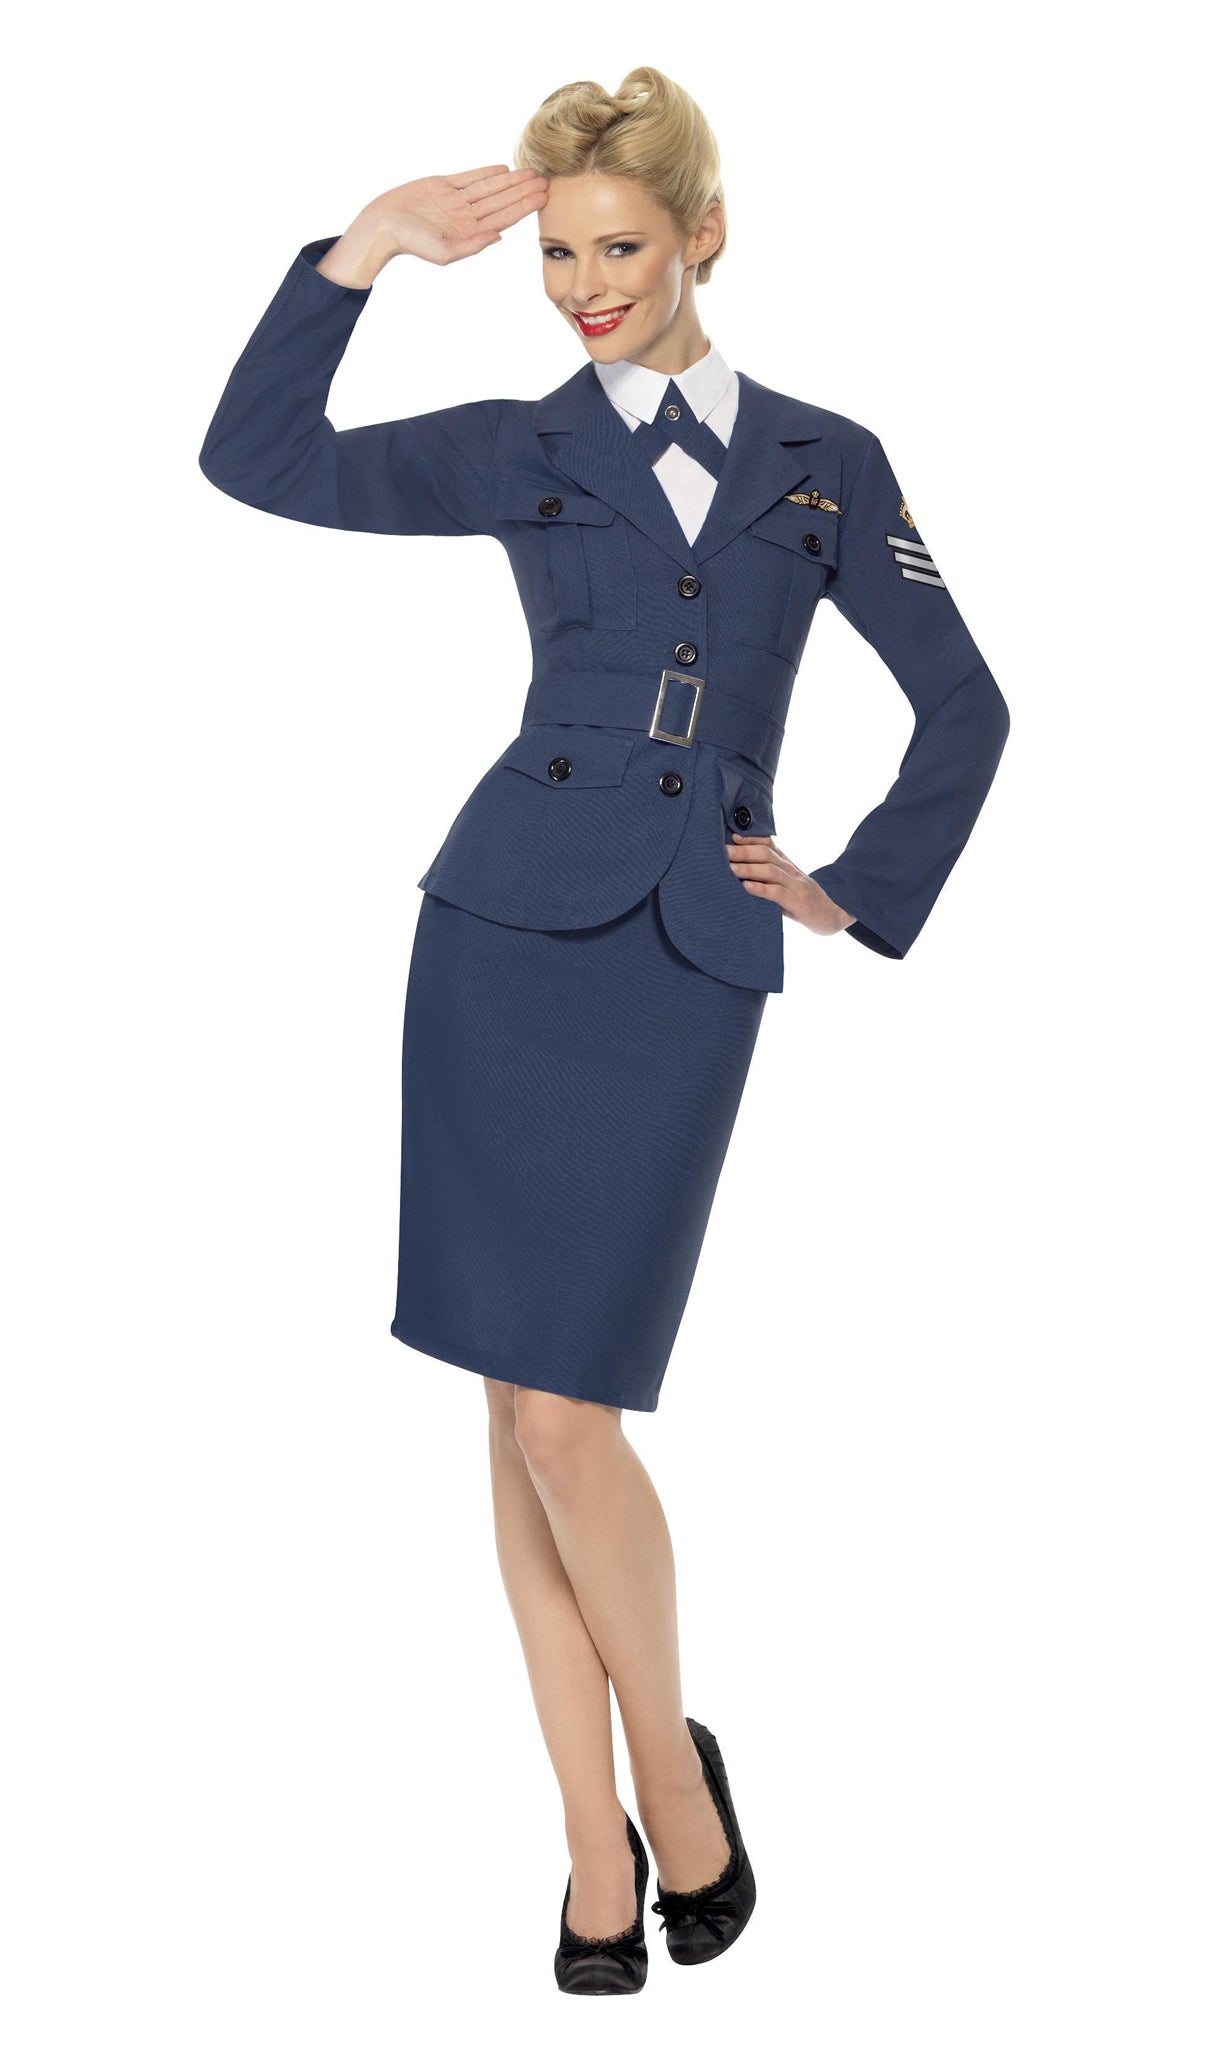 Blue Air Force captain costume with jacket, skirt, mock shirt & tie and belt